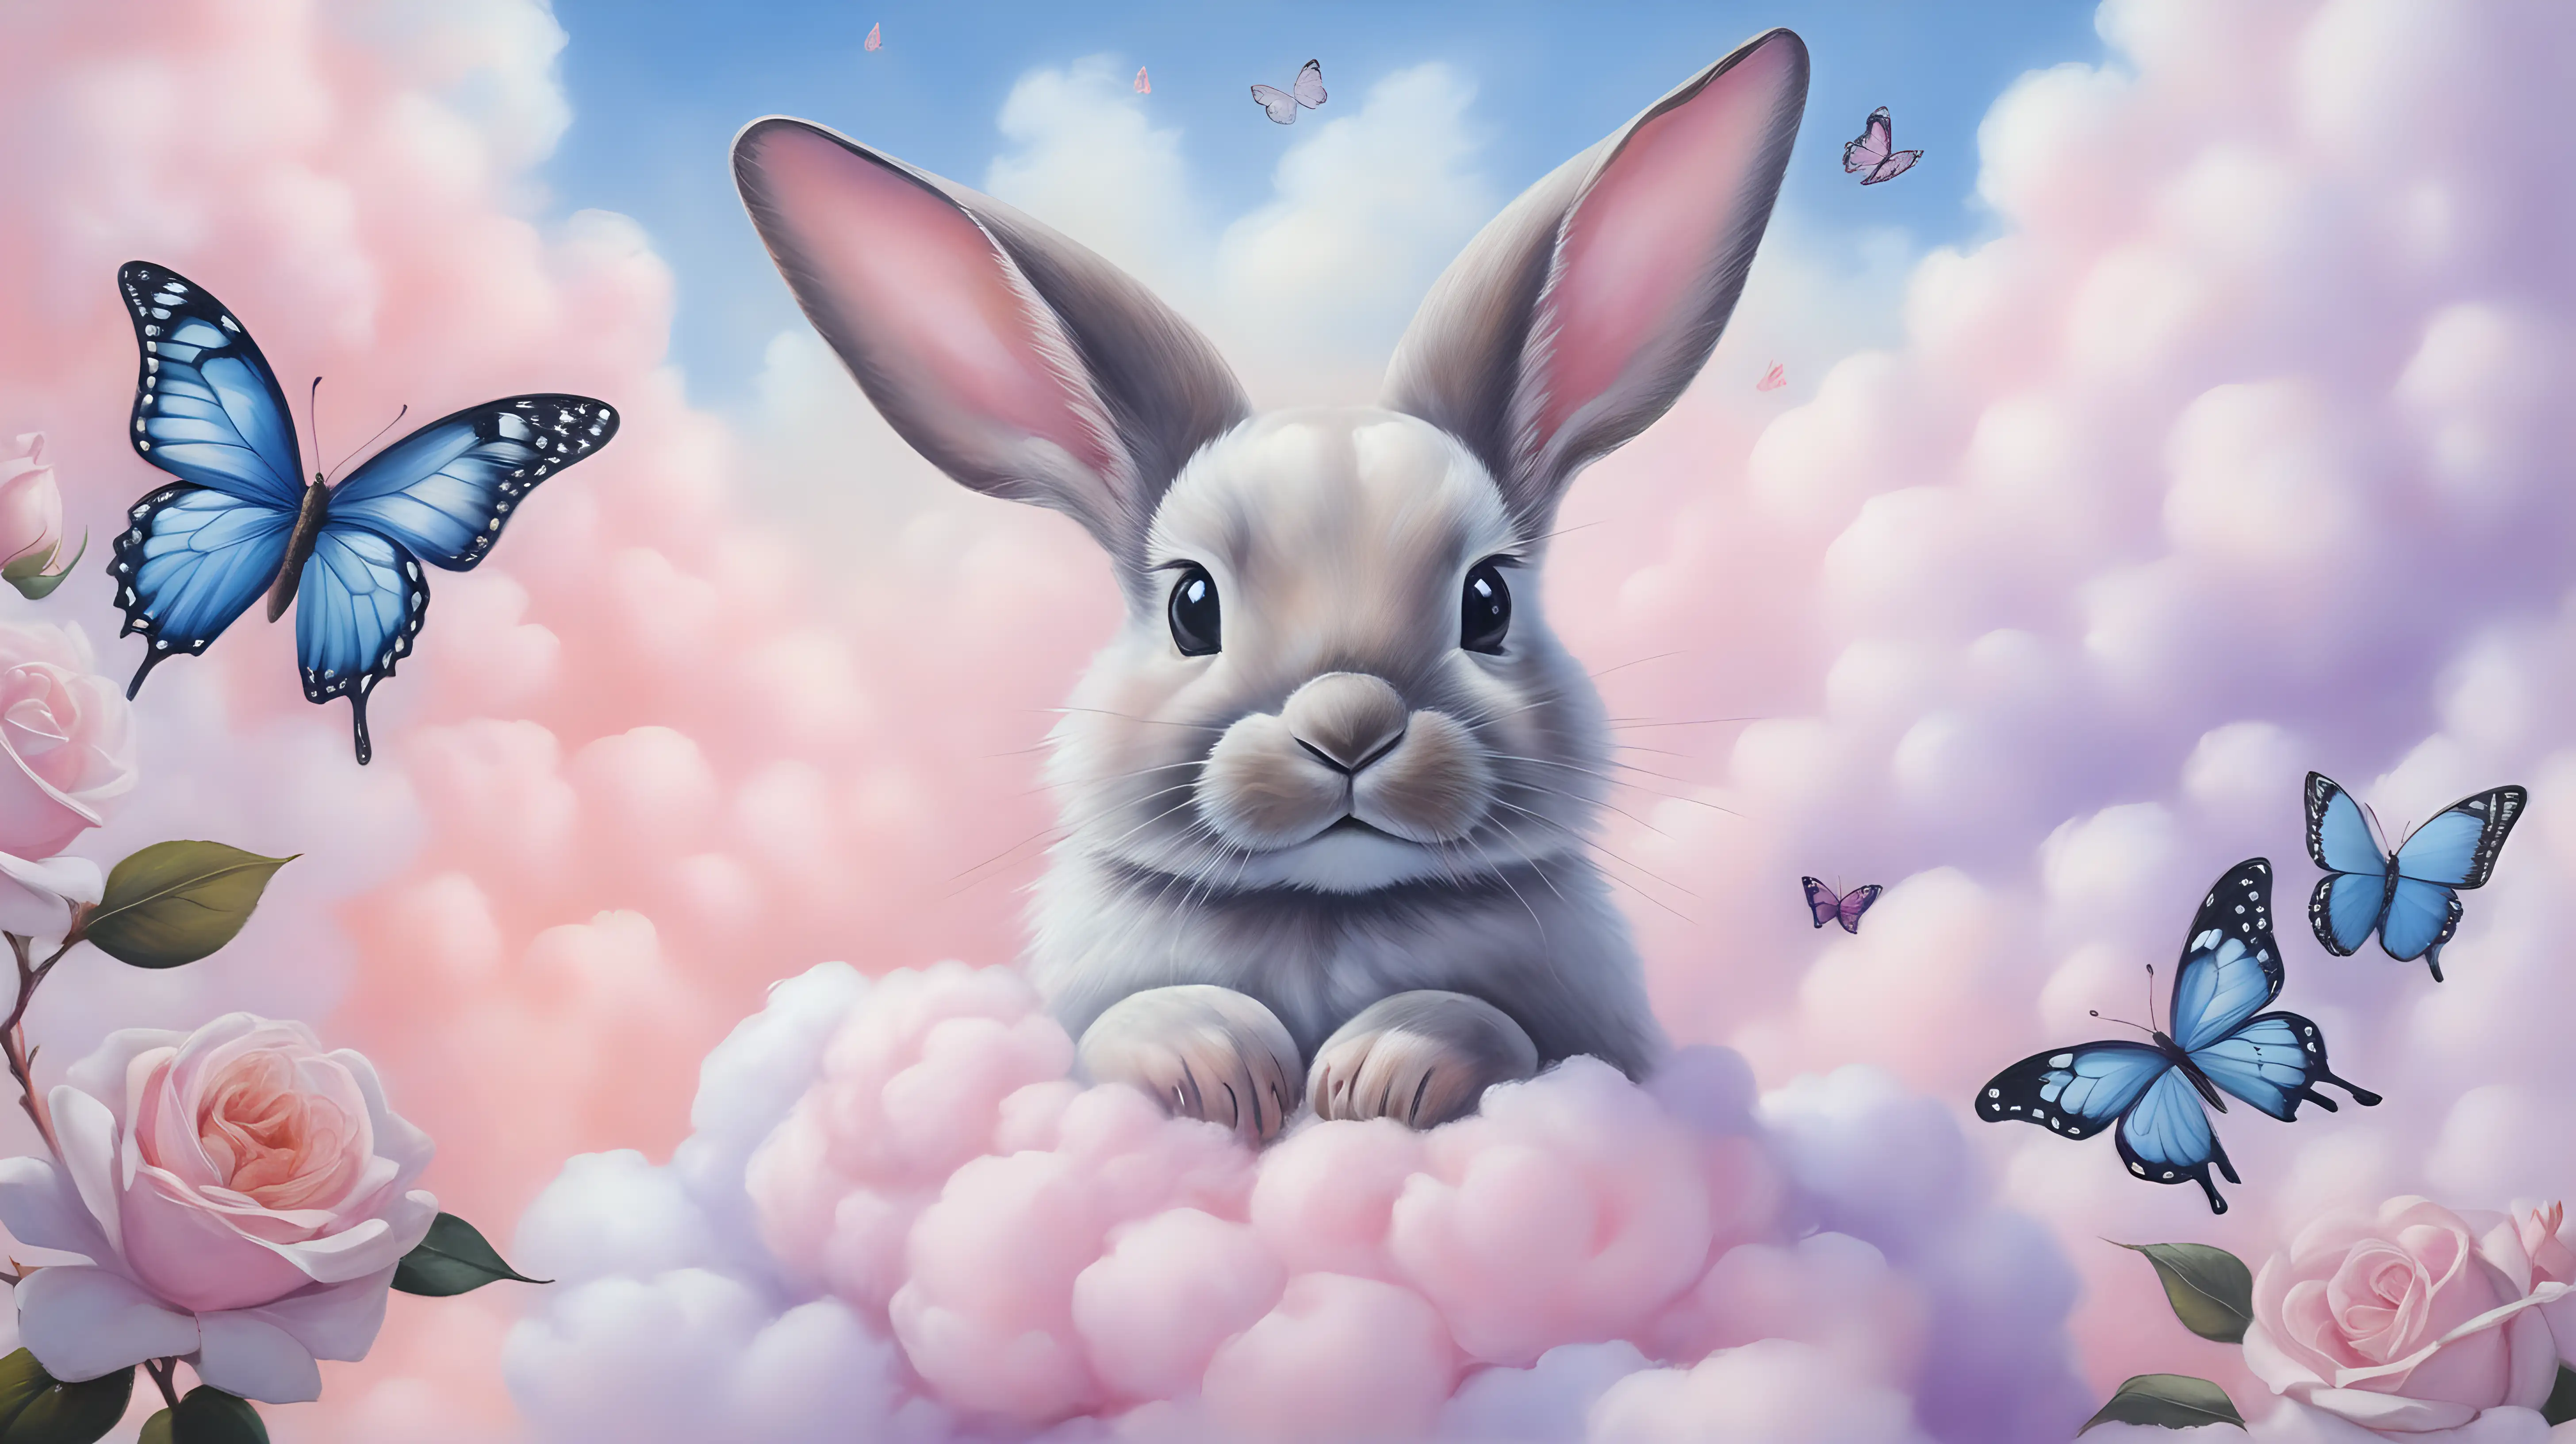 Enchanting Rabbit and Butterfly with Rose Cupcake in Cotton Candy Wonderland